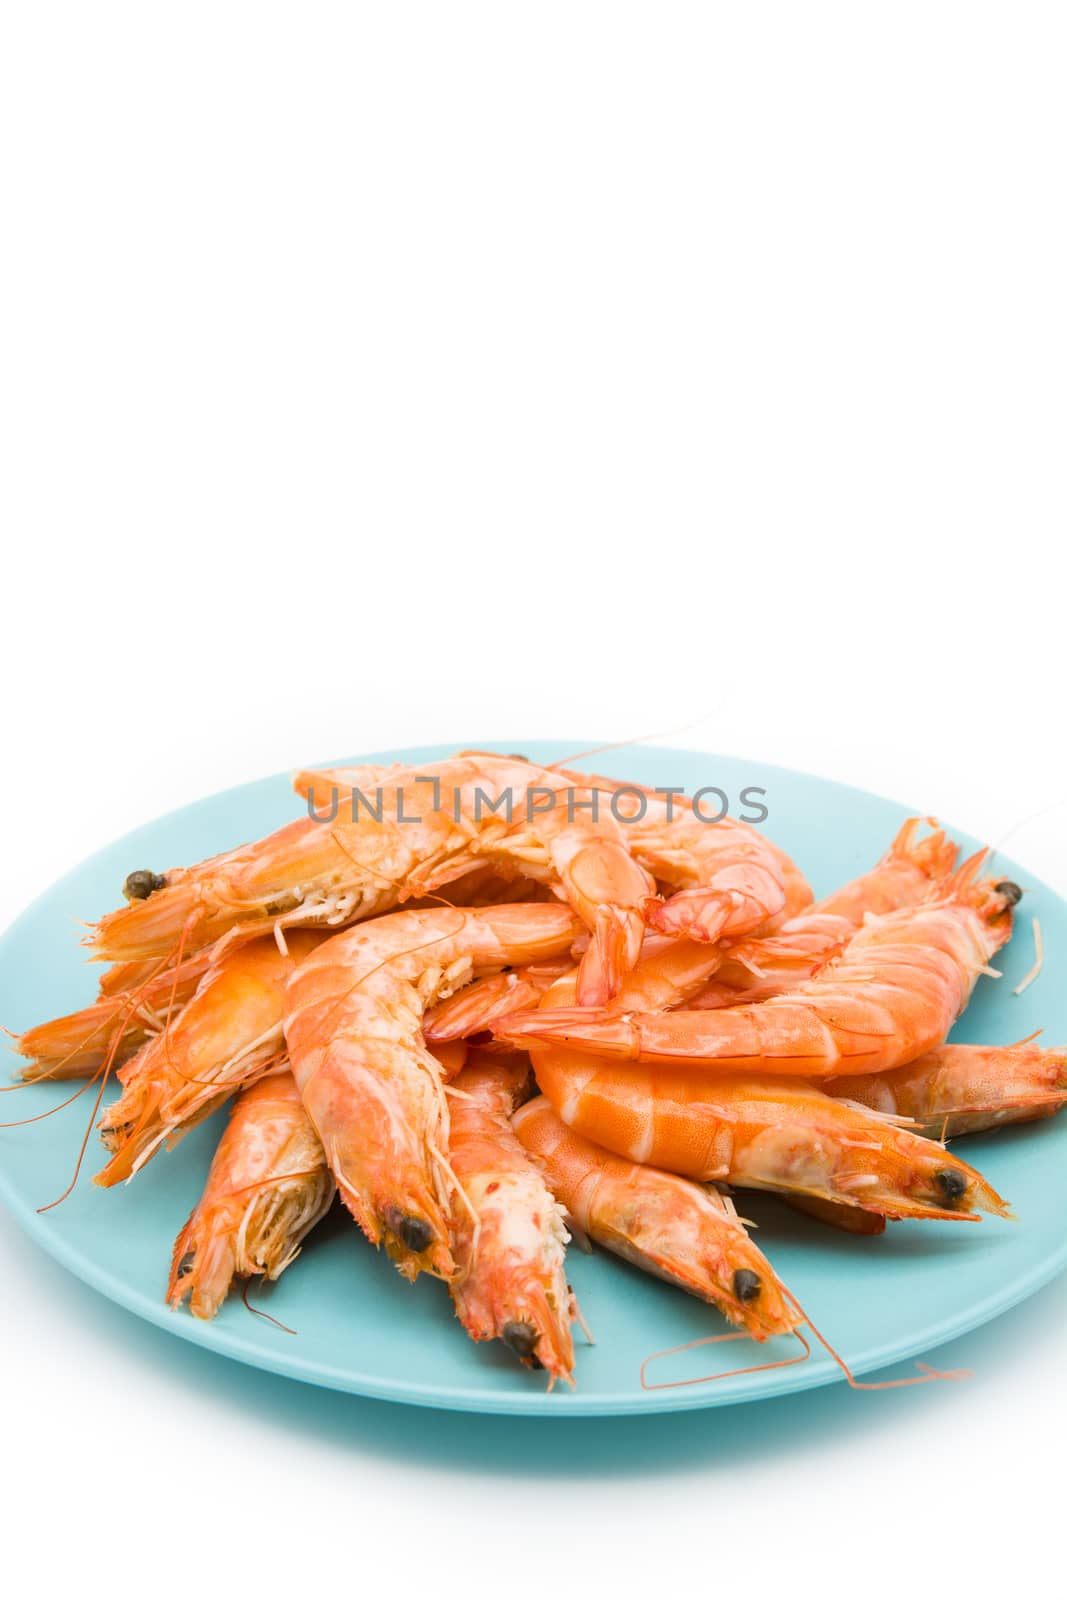 Grilled shrimps on blue plate isolated on white background by chandlervid85